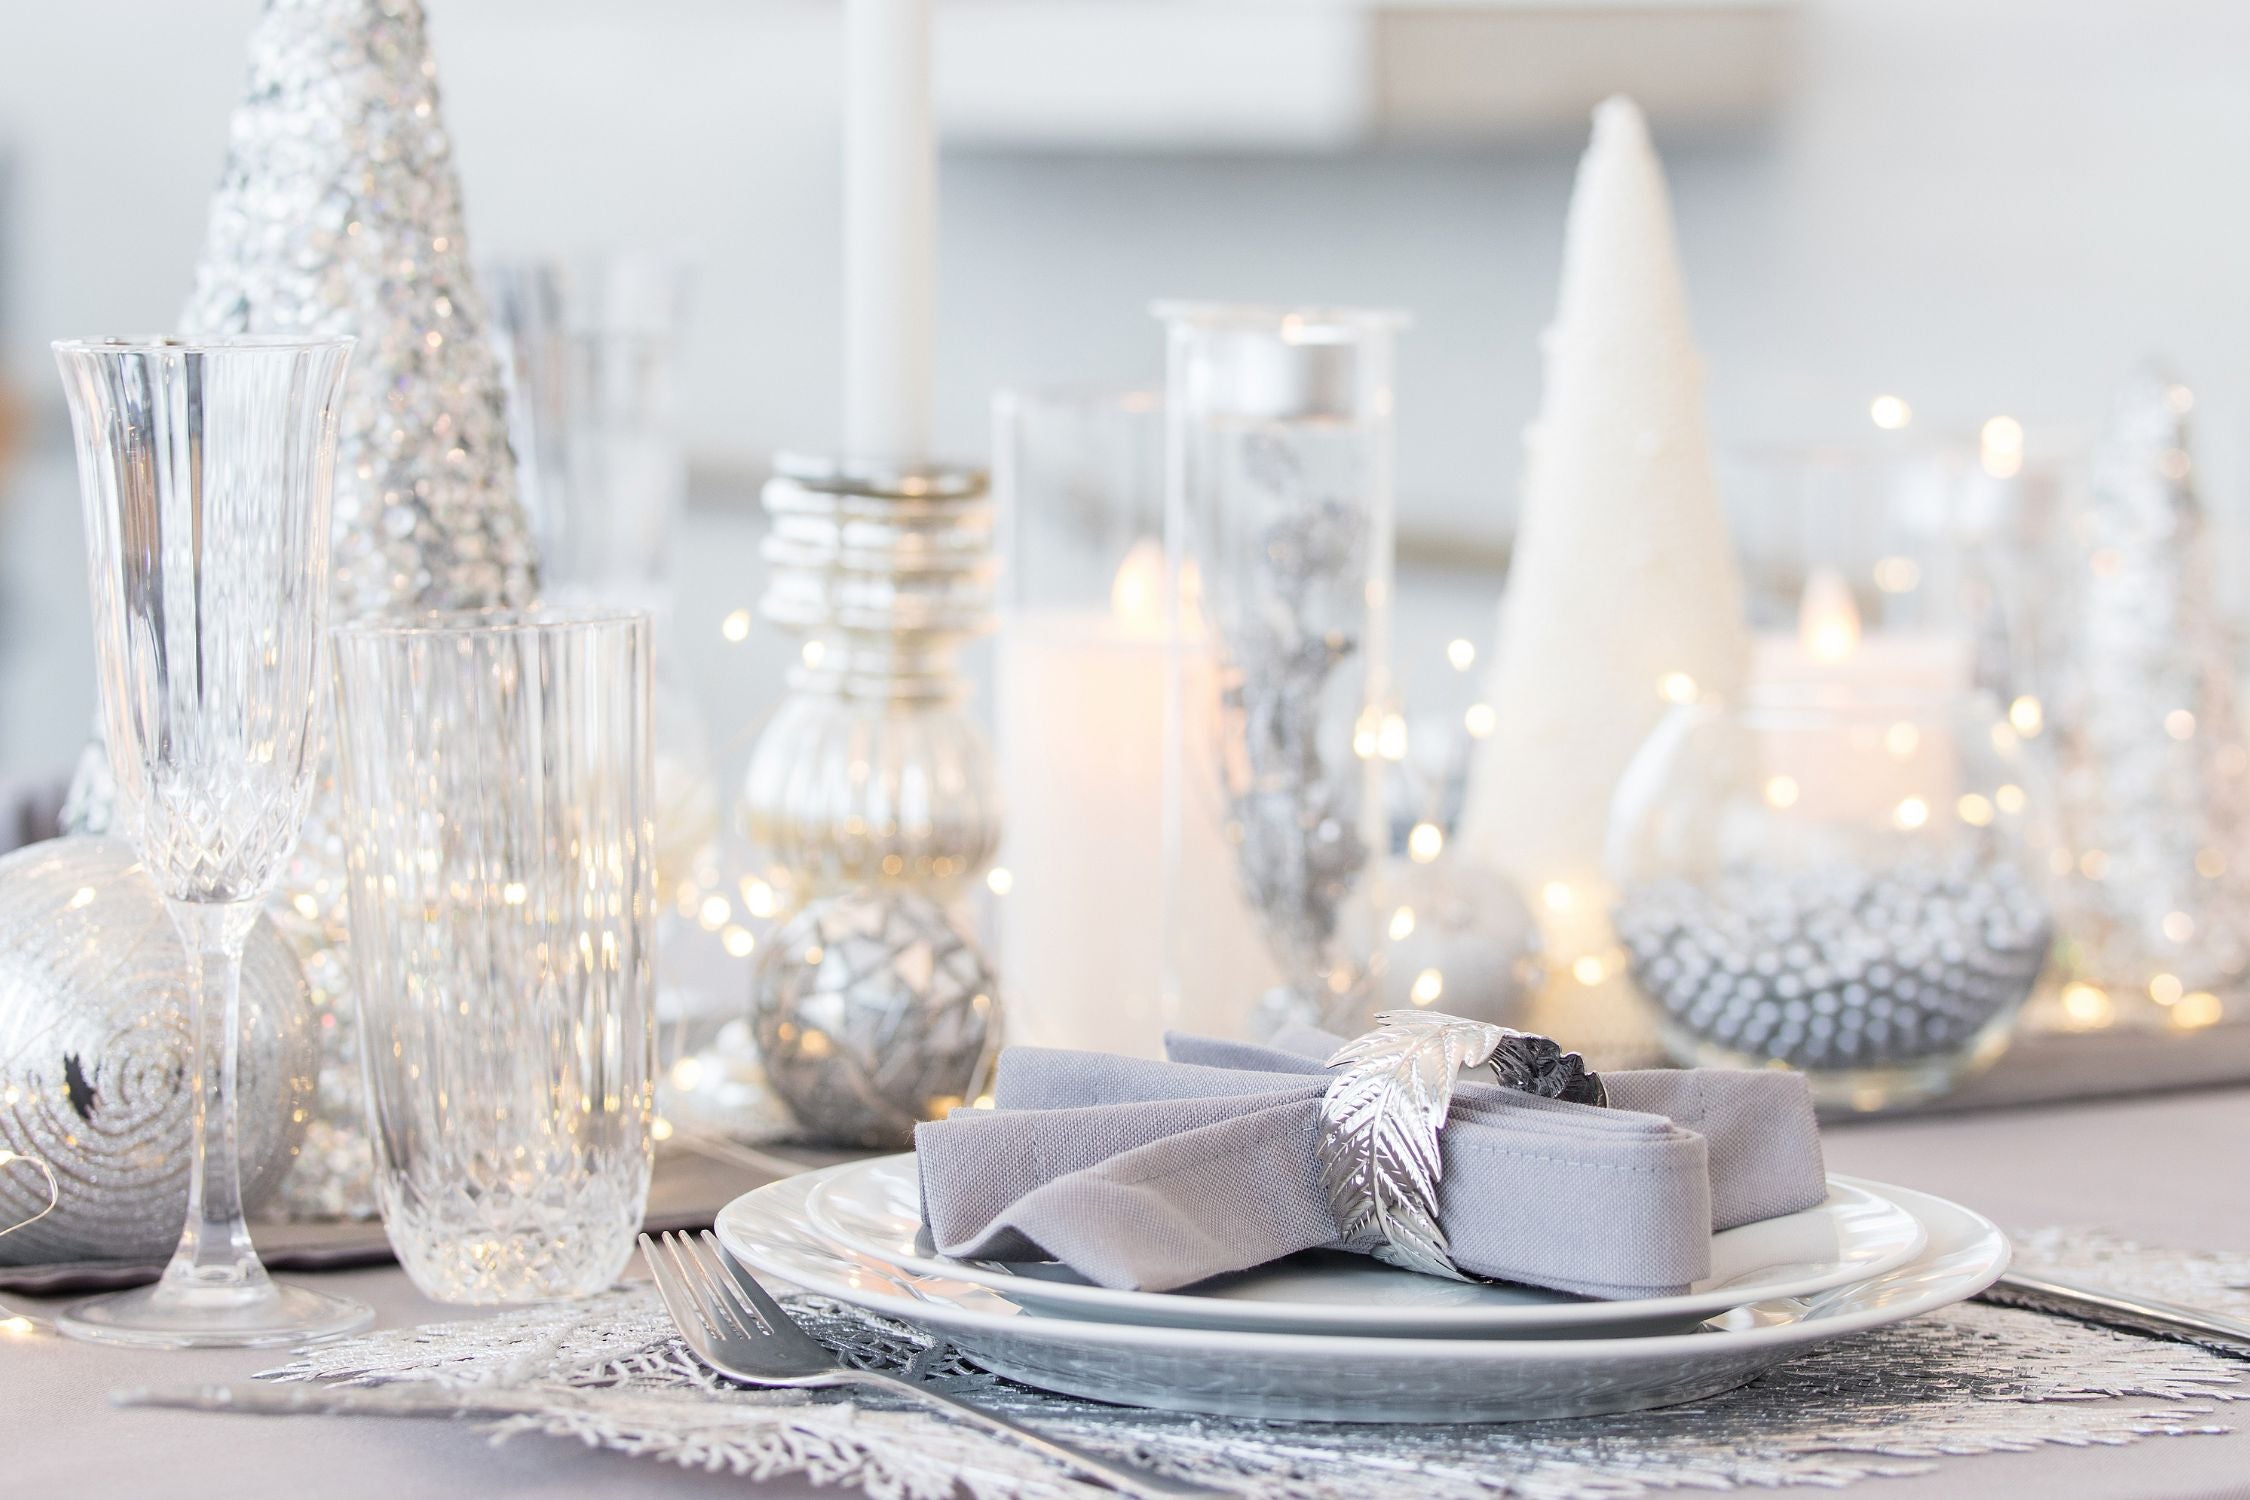 Customize Your Event With These Decor Must Haves!